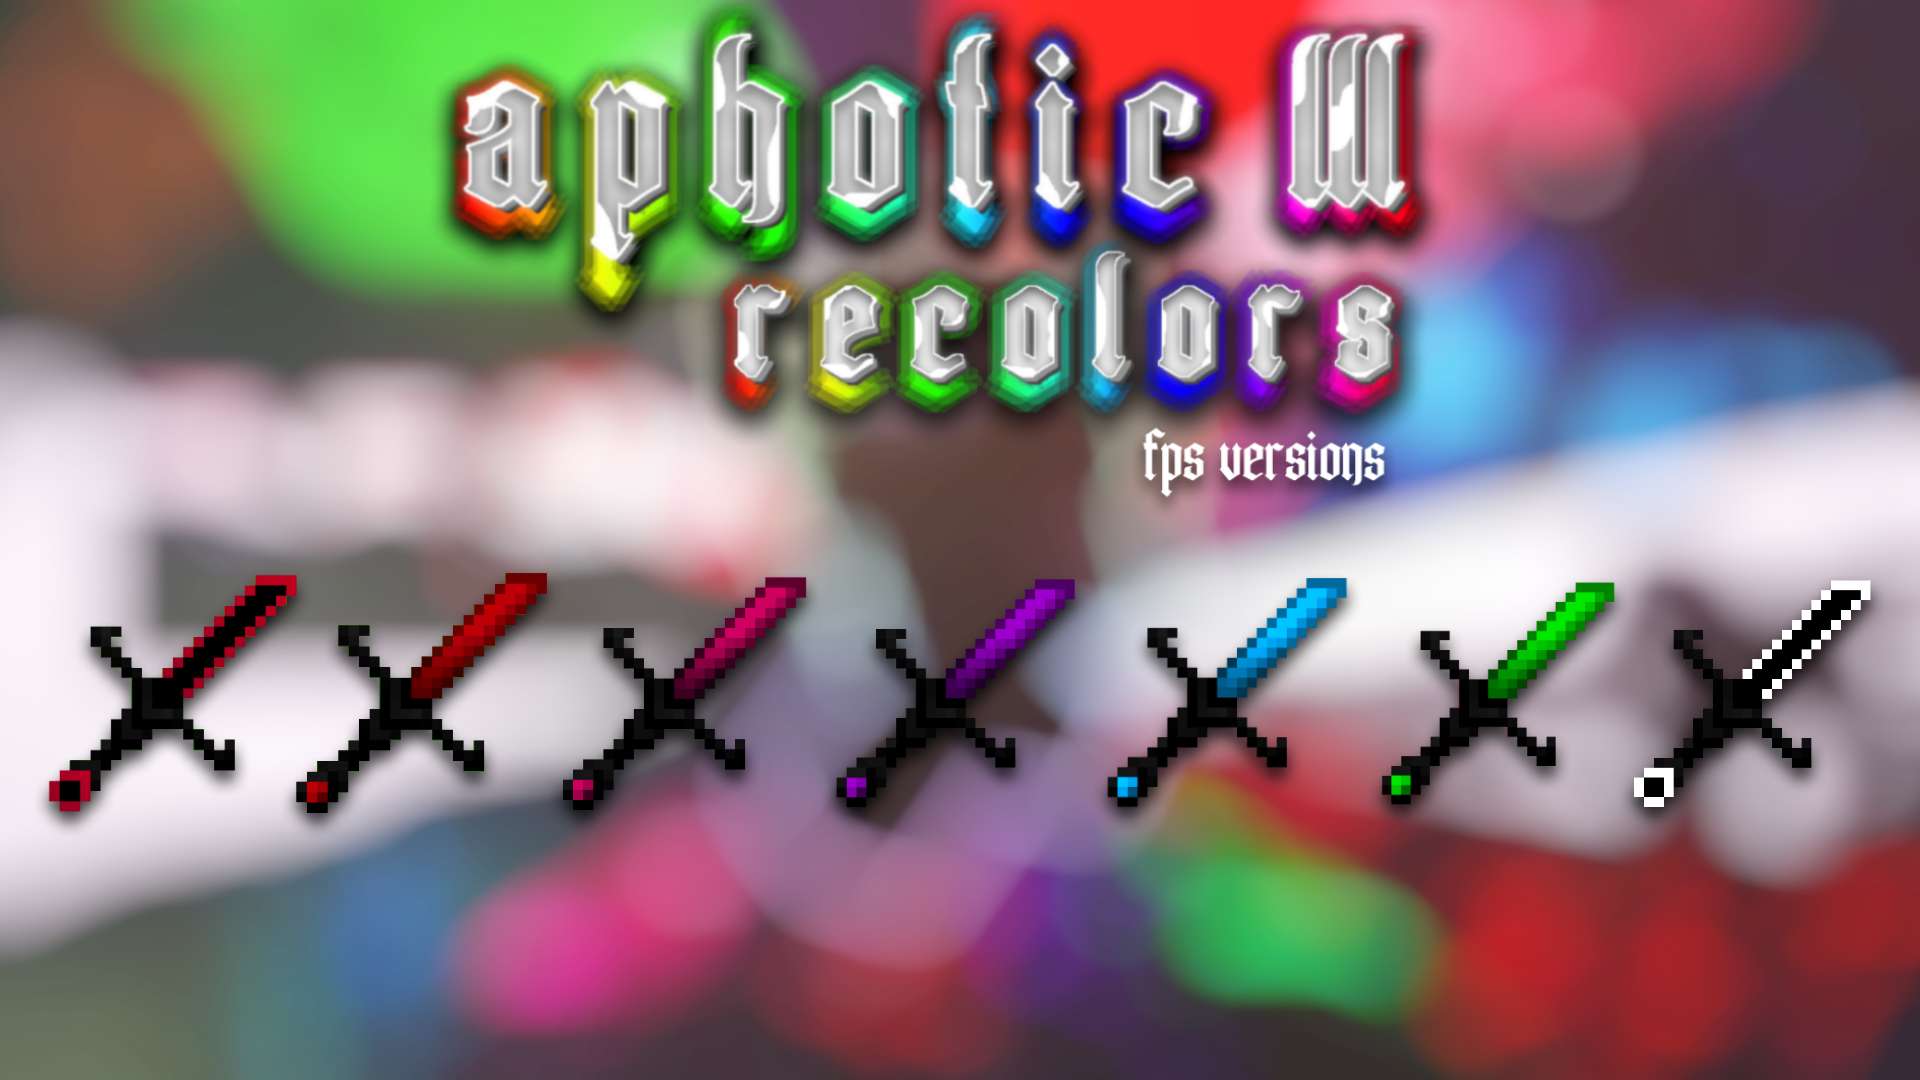 Aphotic III - FPS versions 32x by xSkadush on PvPRP